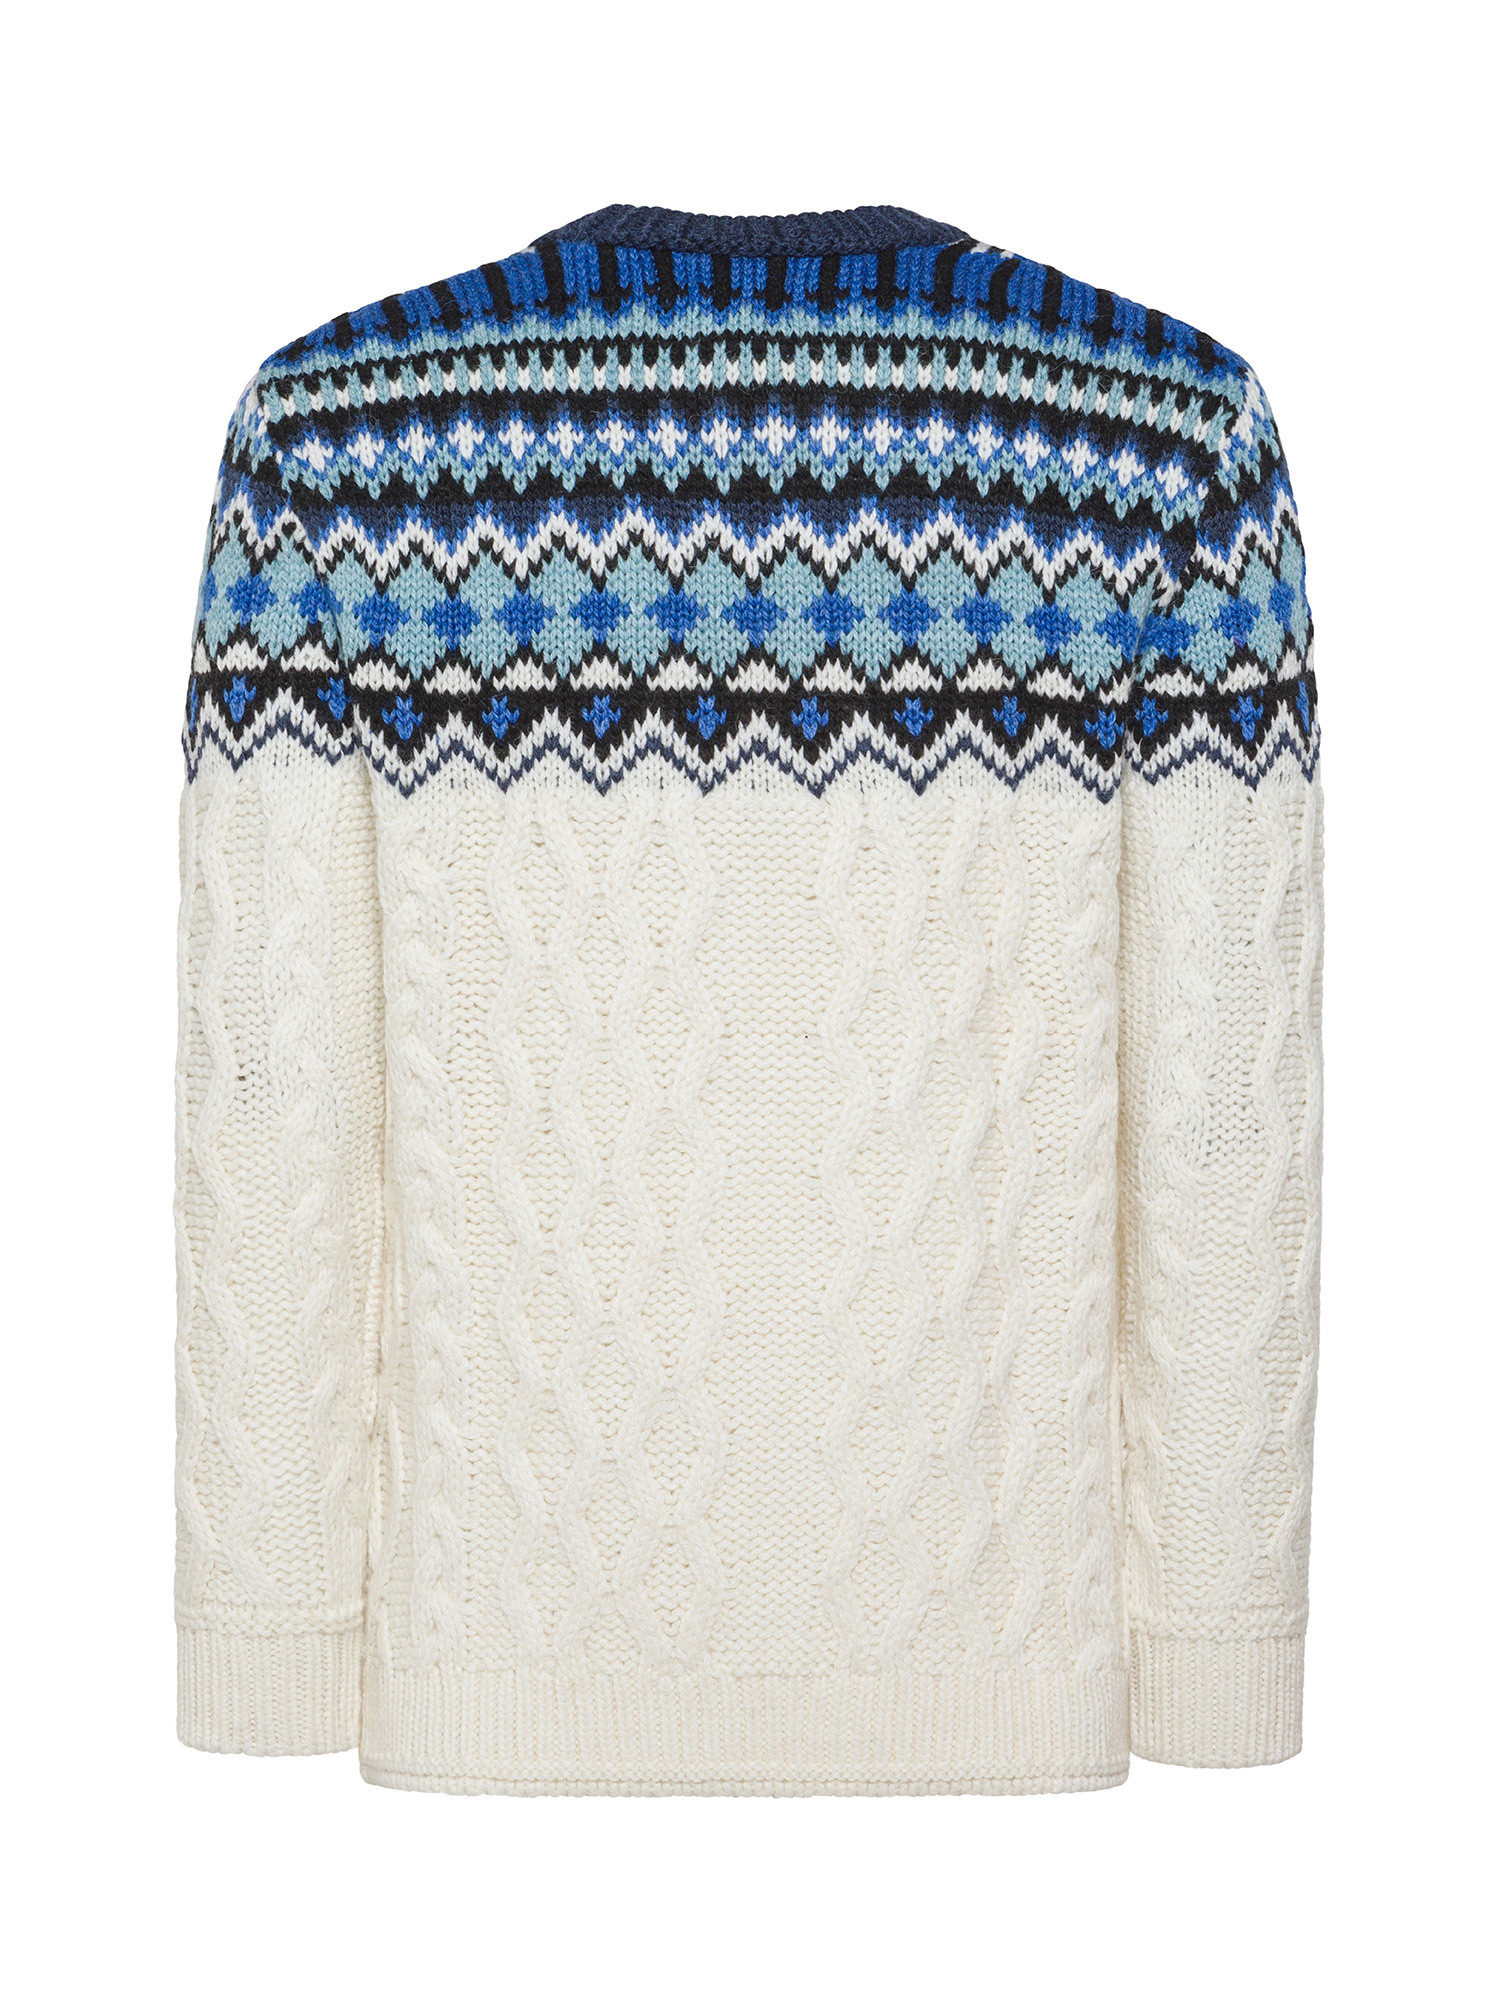 Superdry - Maglione girocollo Fair Isle, Bianco, large image number 1